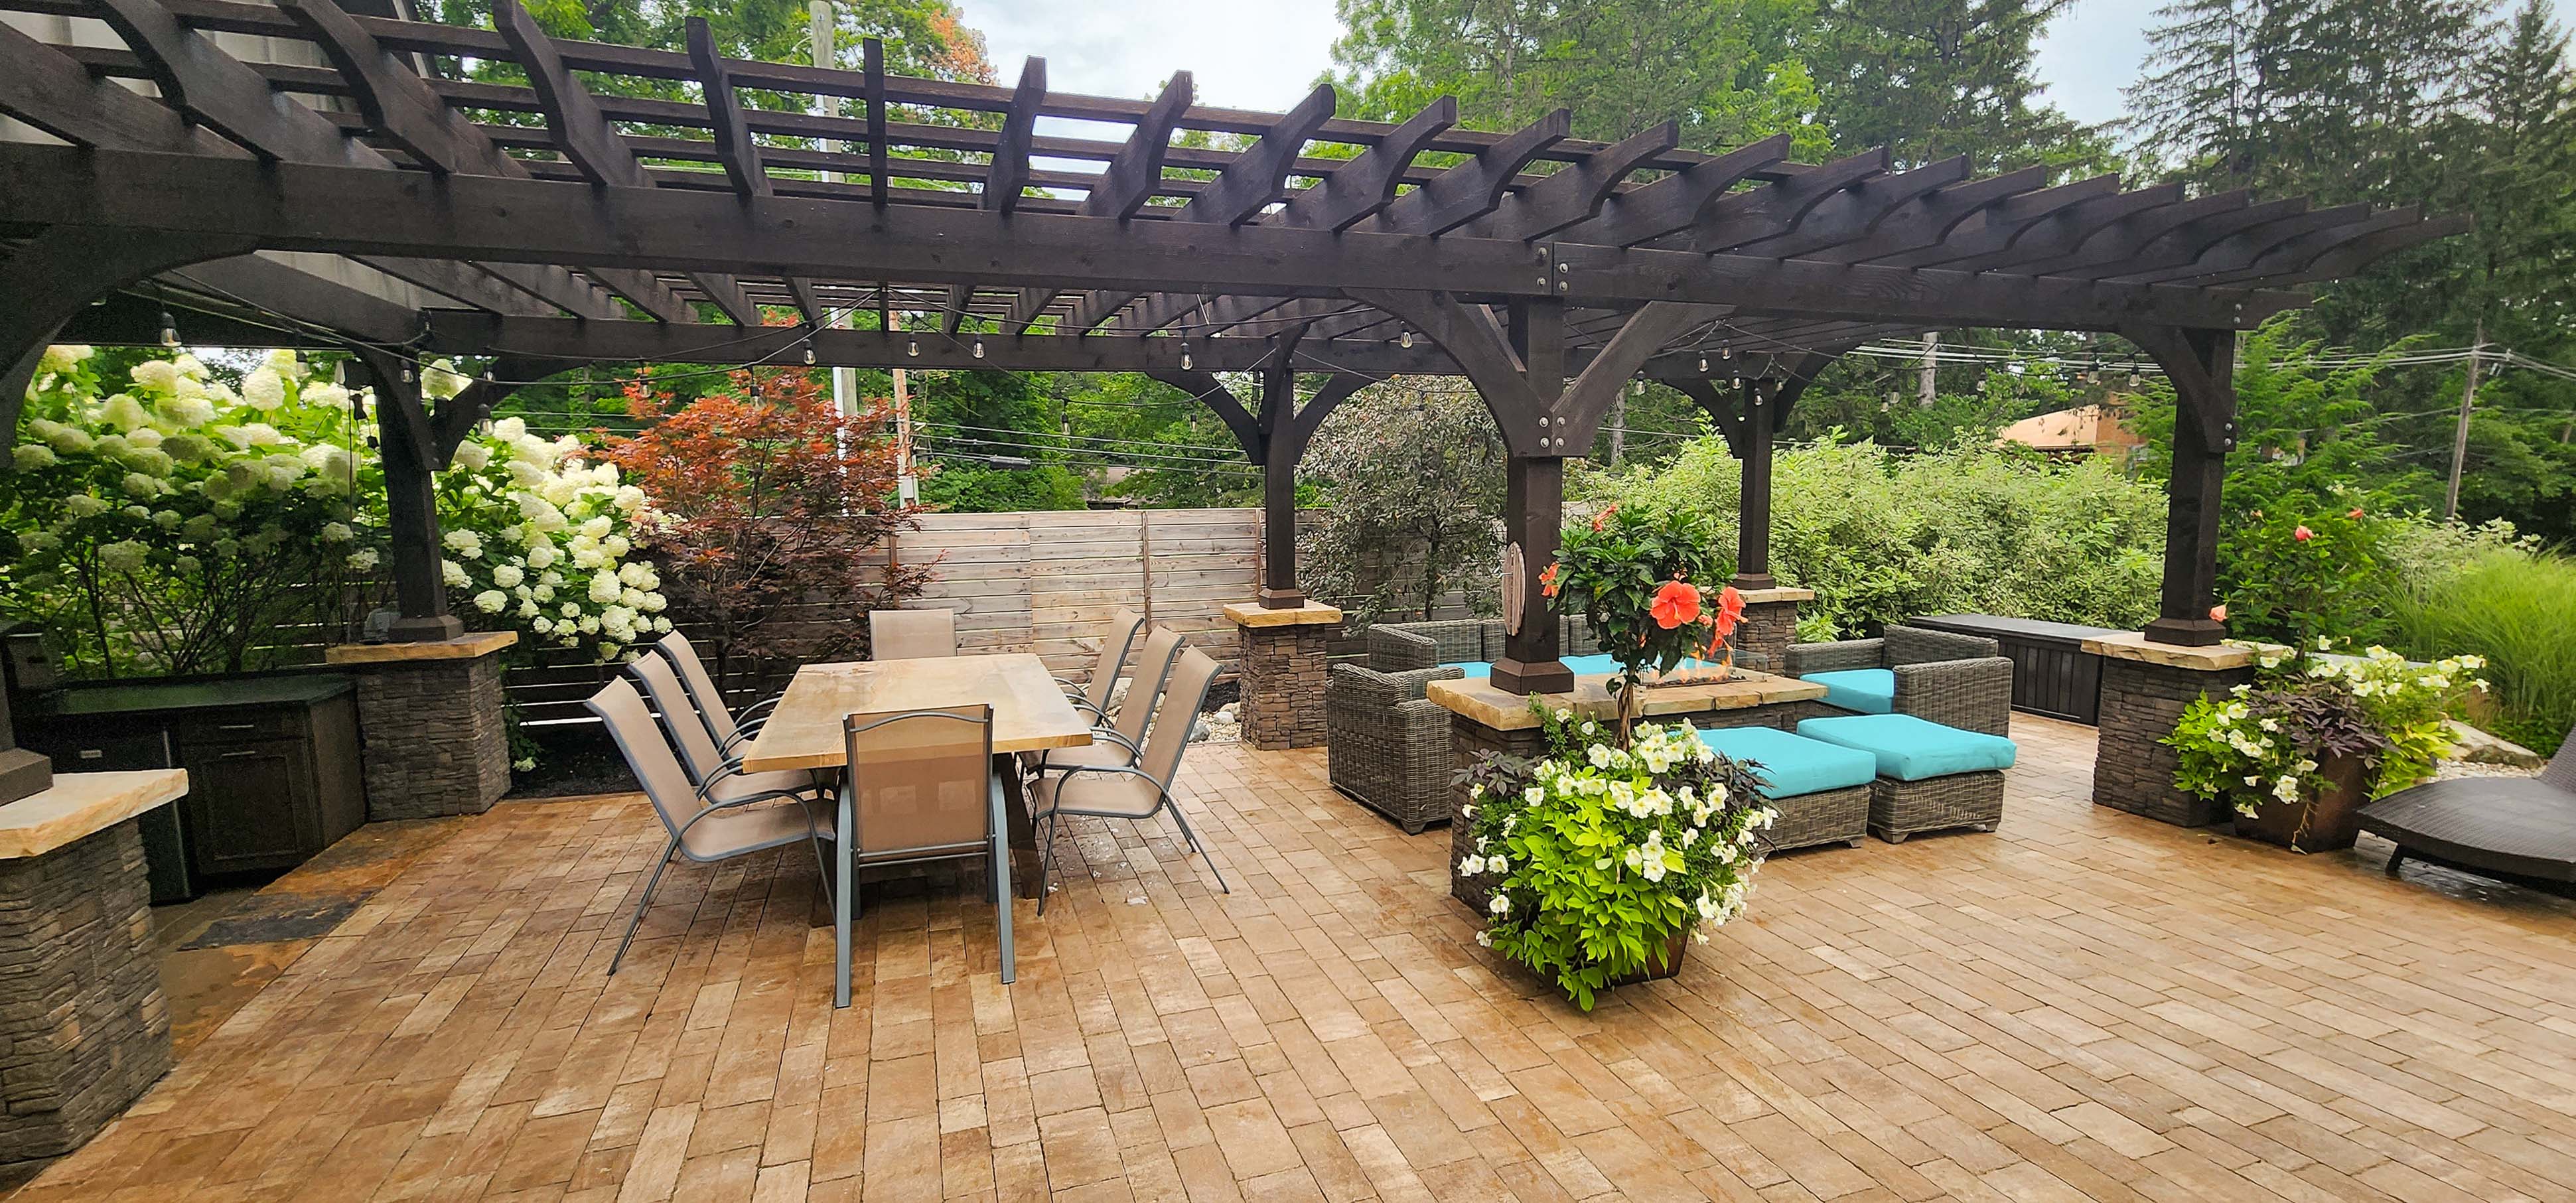 Patio with pergola, landscaping, and fire feature